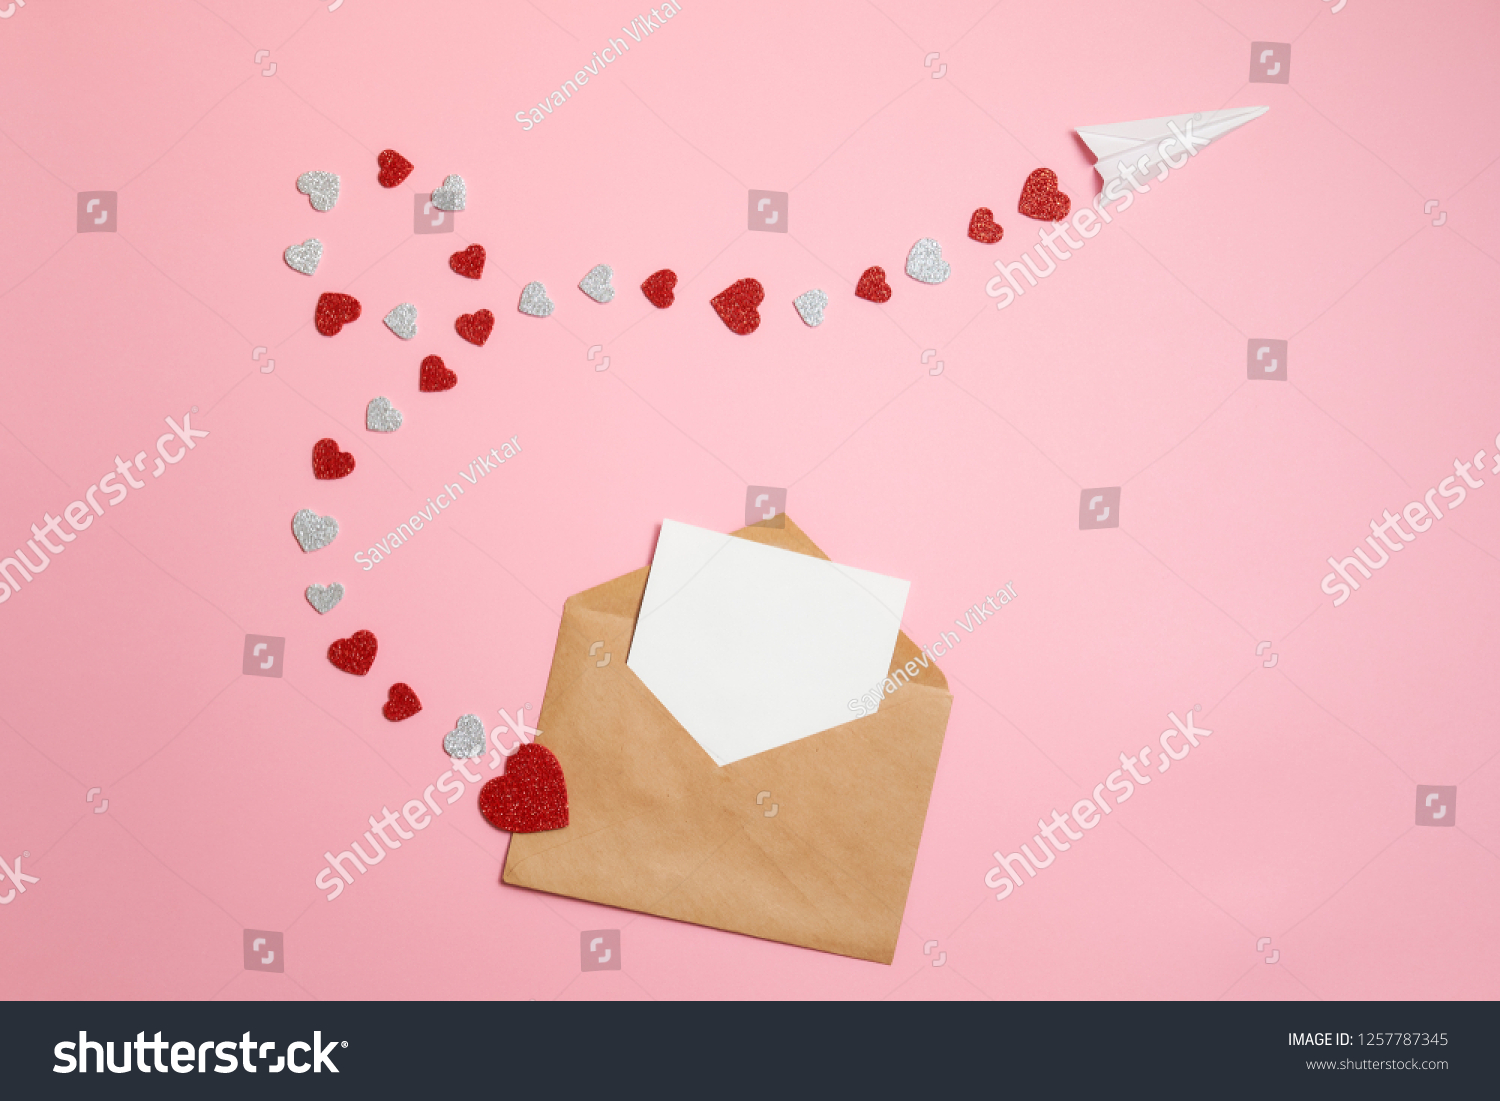 Distance love concept, sending love letter, valentines day. Kraft envelope with blank postcard and paper airplane flying on route made of heart shaped valentines cards lay on pink background desk #1257787345